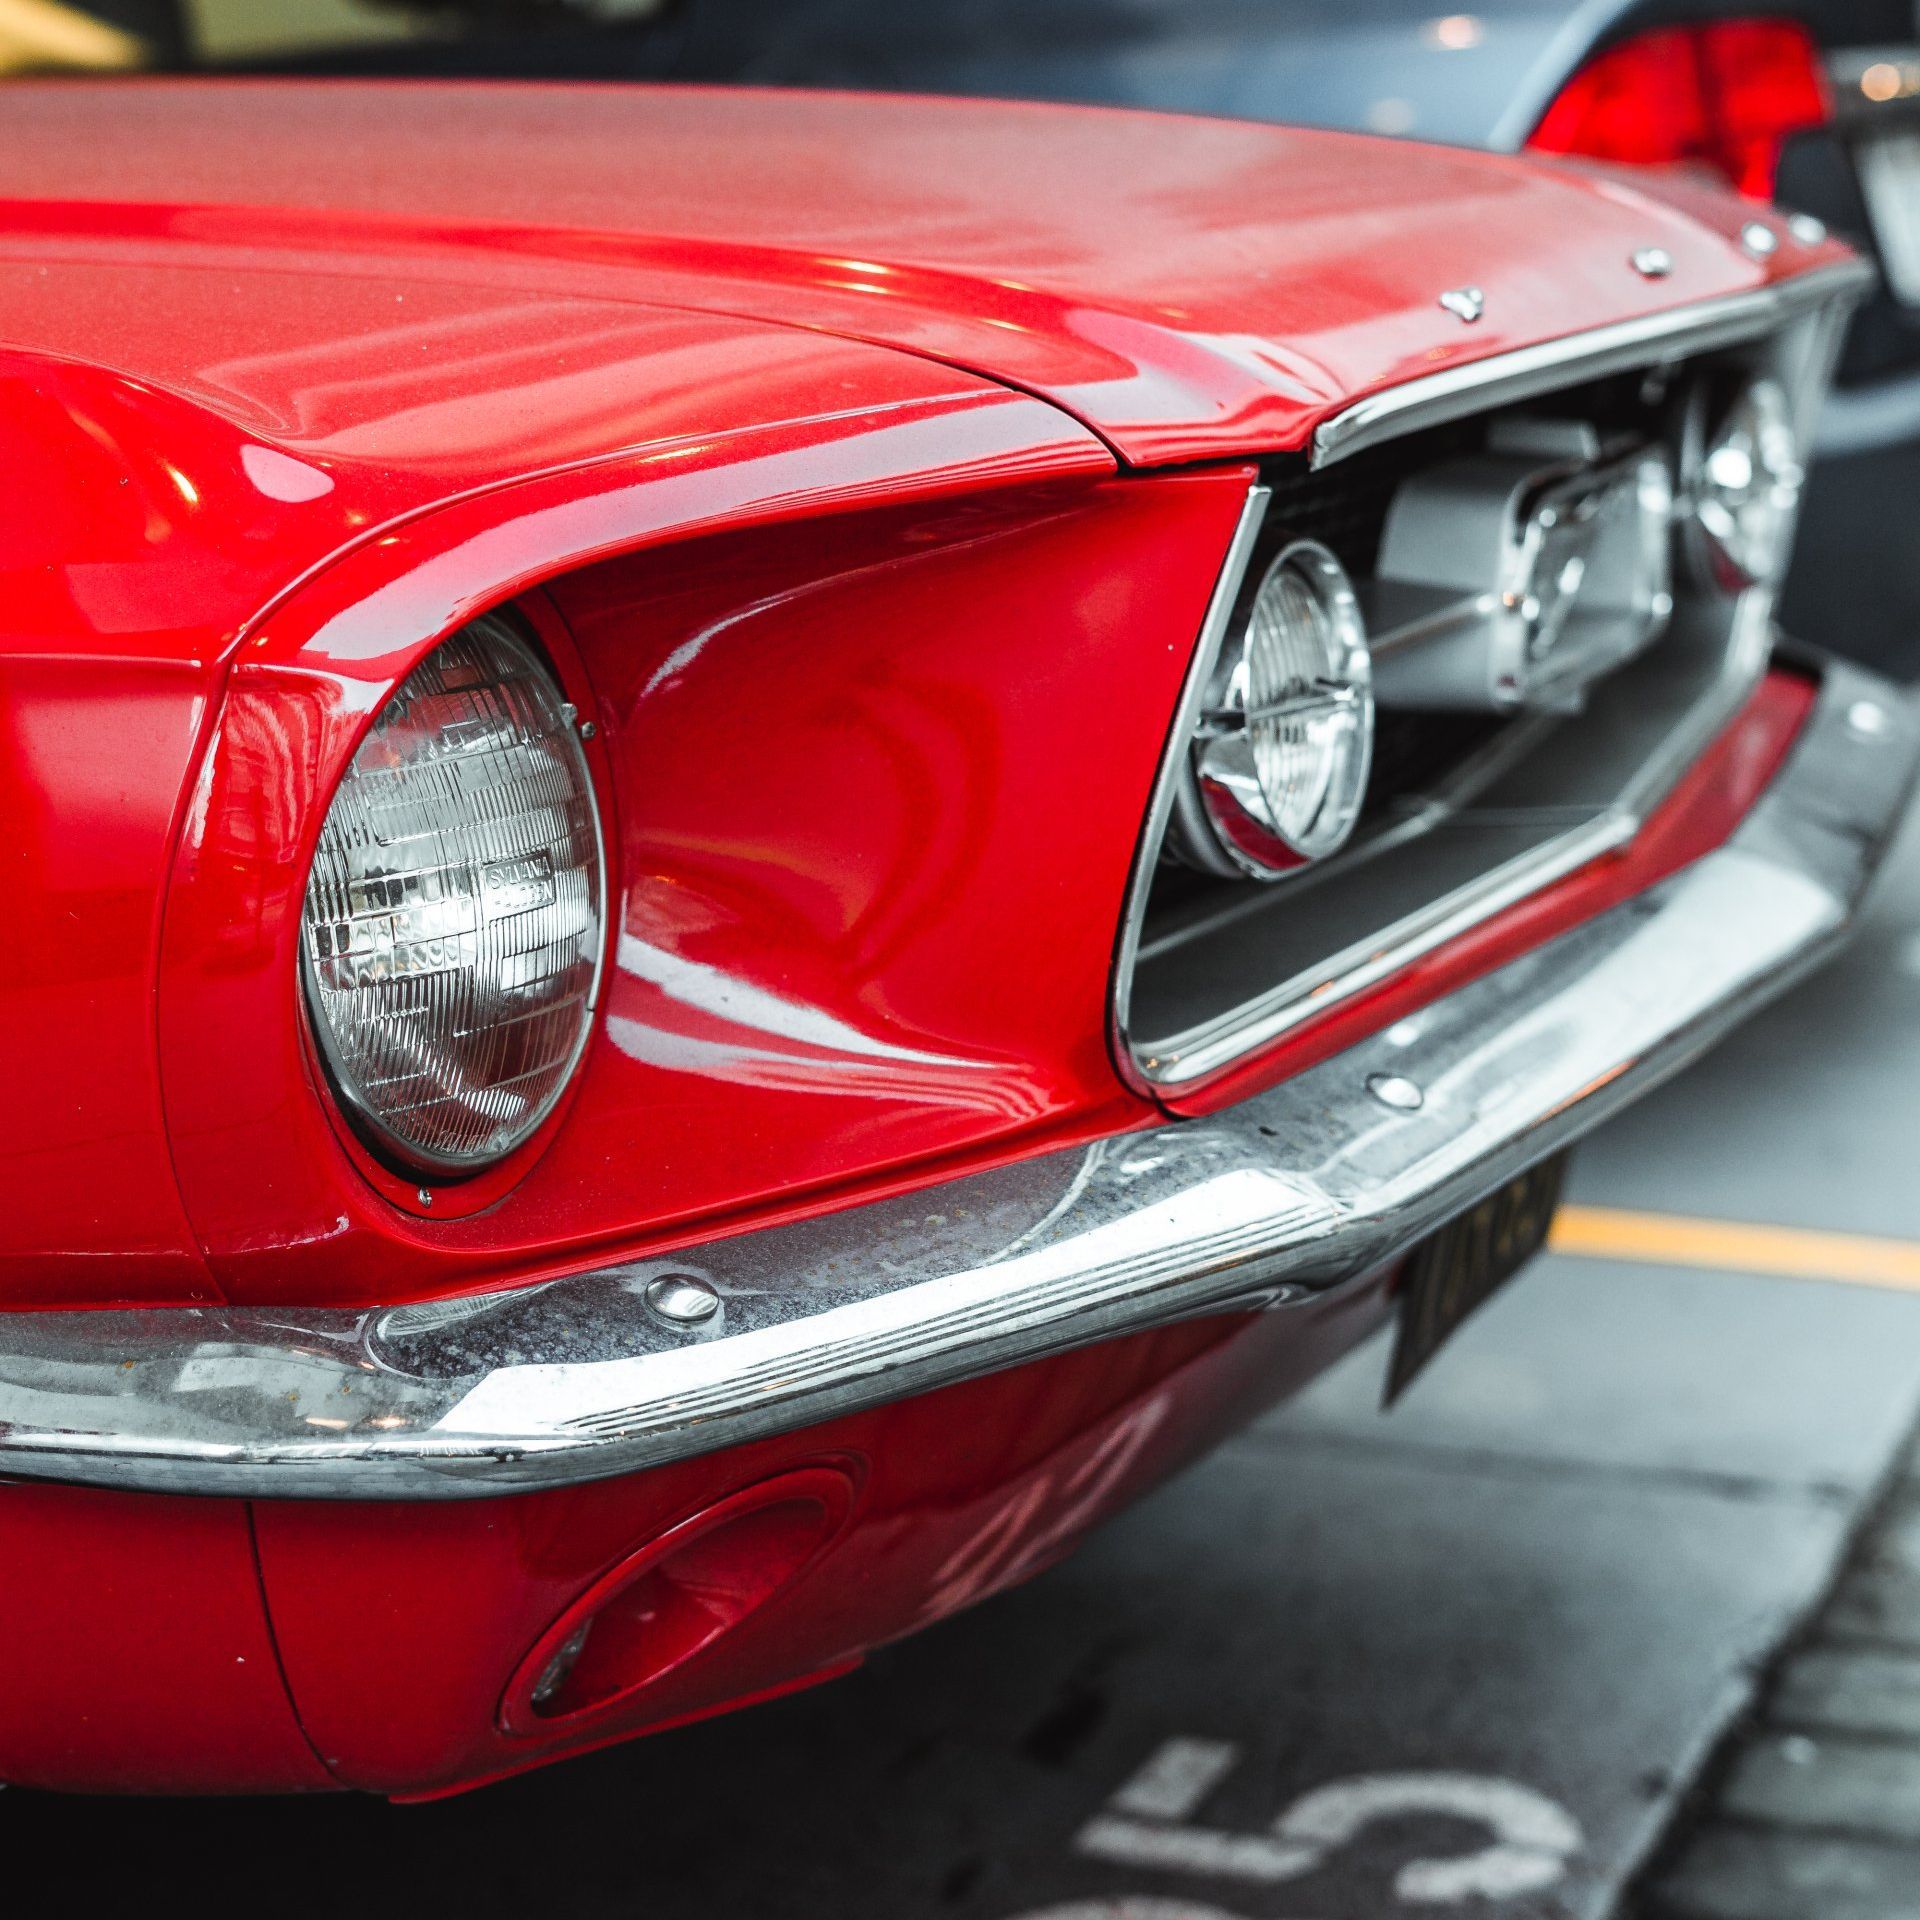 A photo of an old classic For Mustang. The car is red and the paint is glossy.